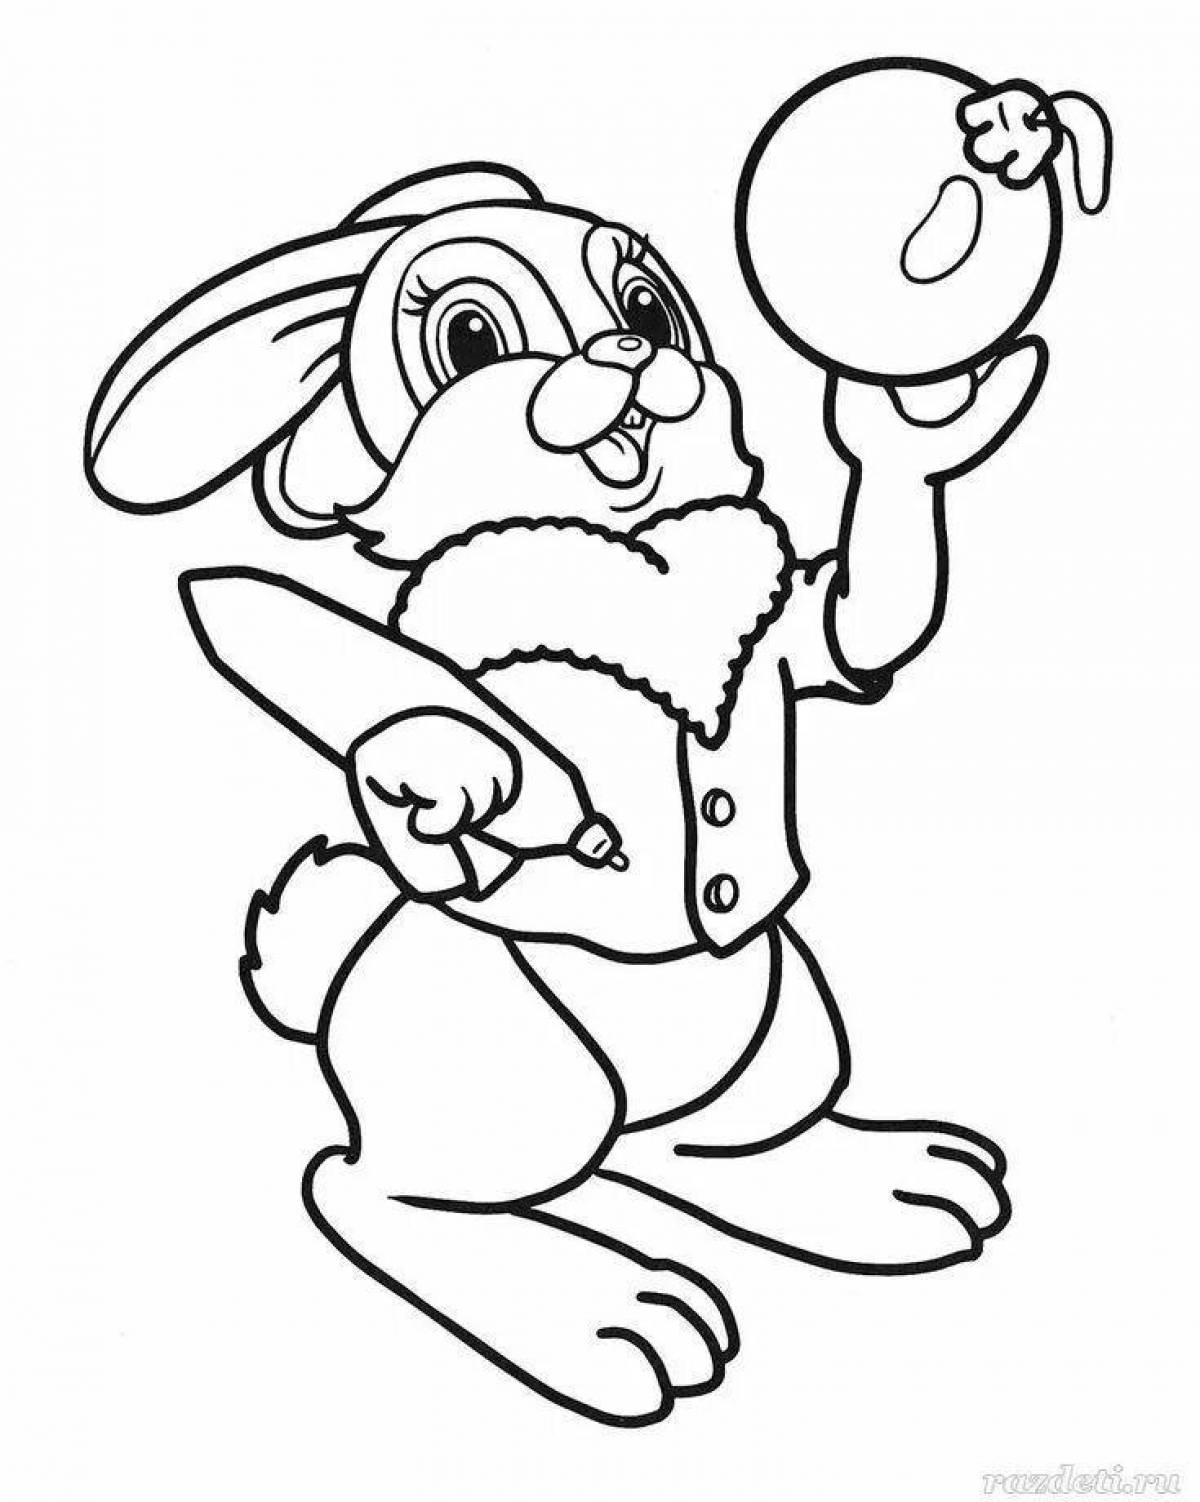 Christmas coloring book with shiny bunny